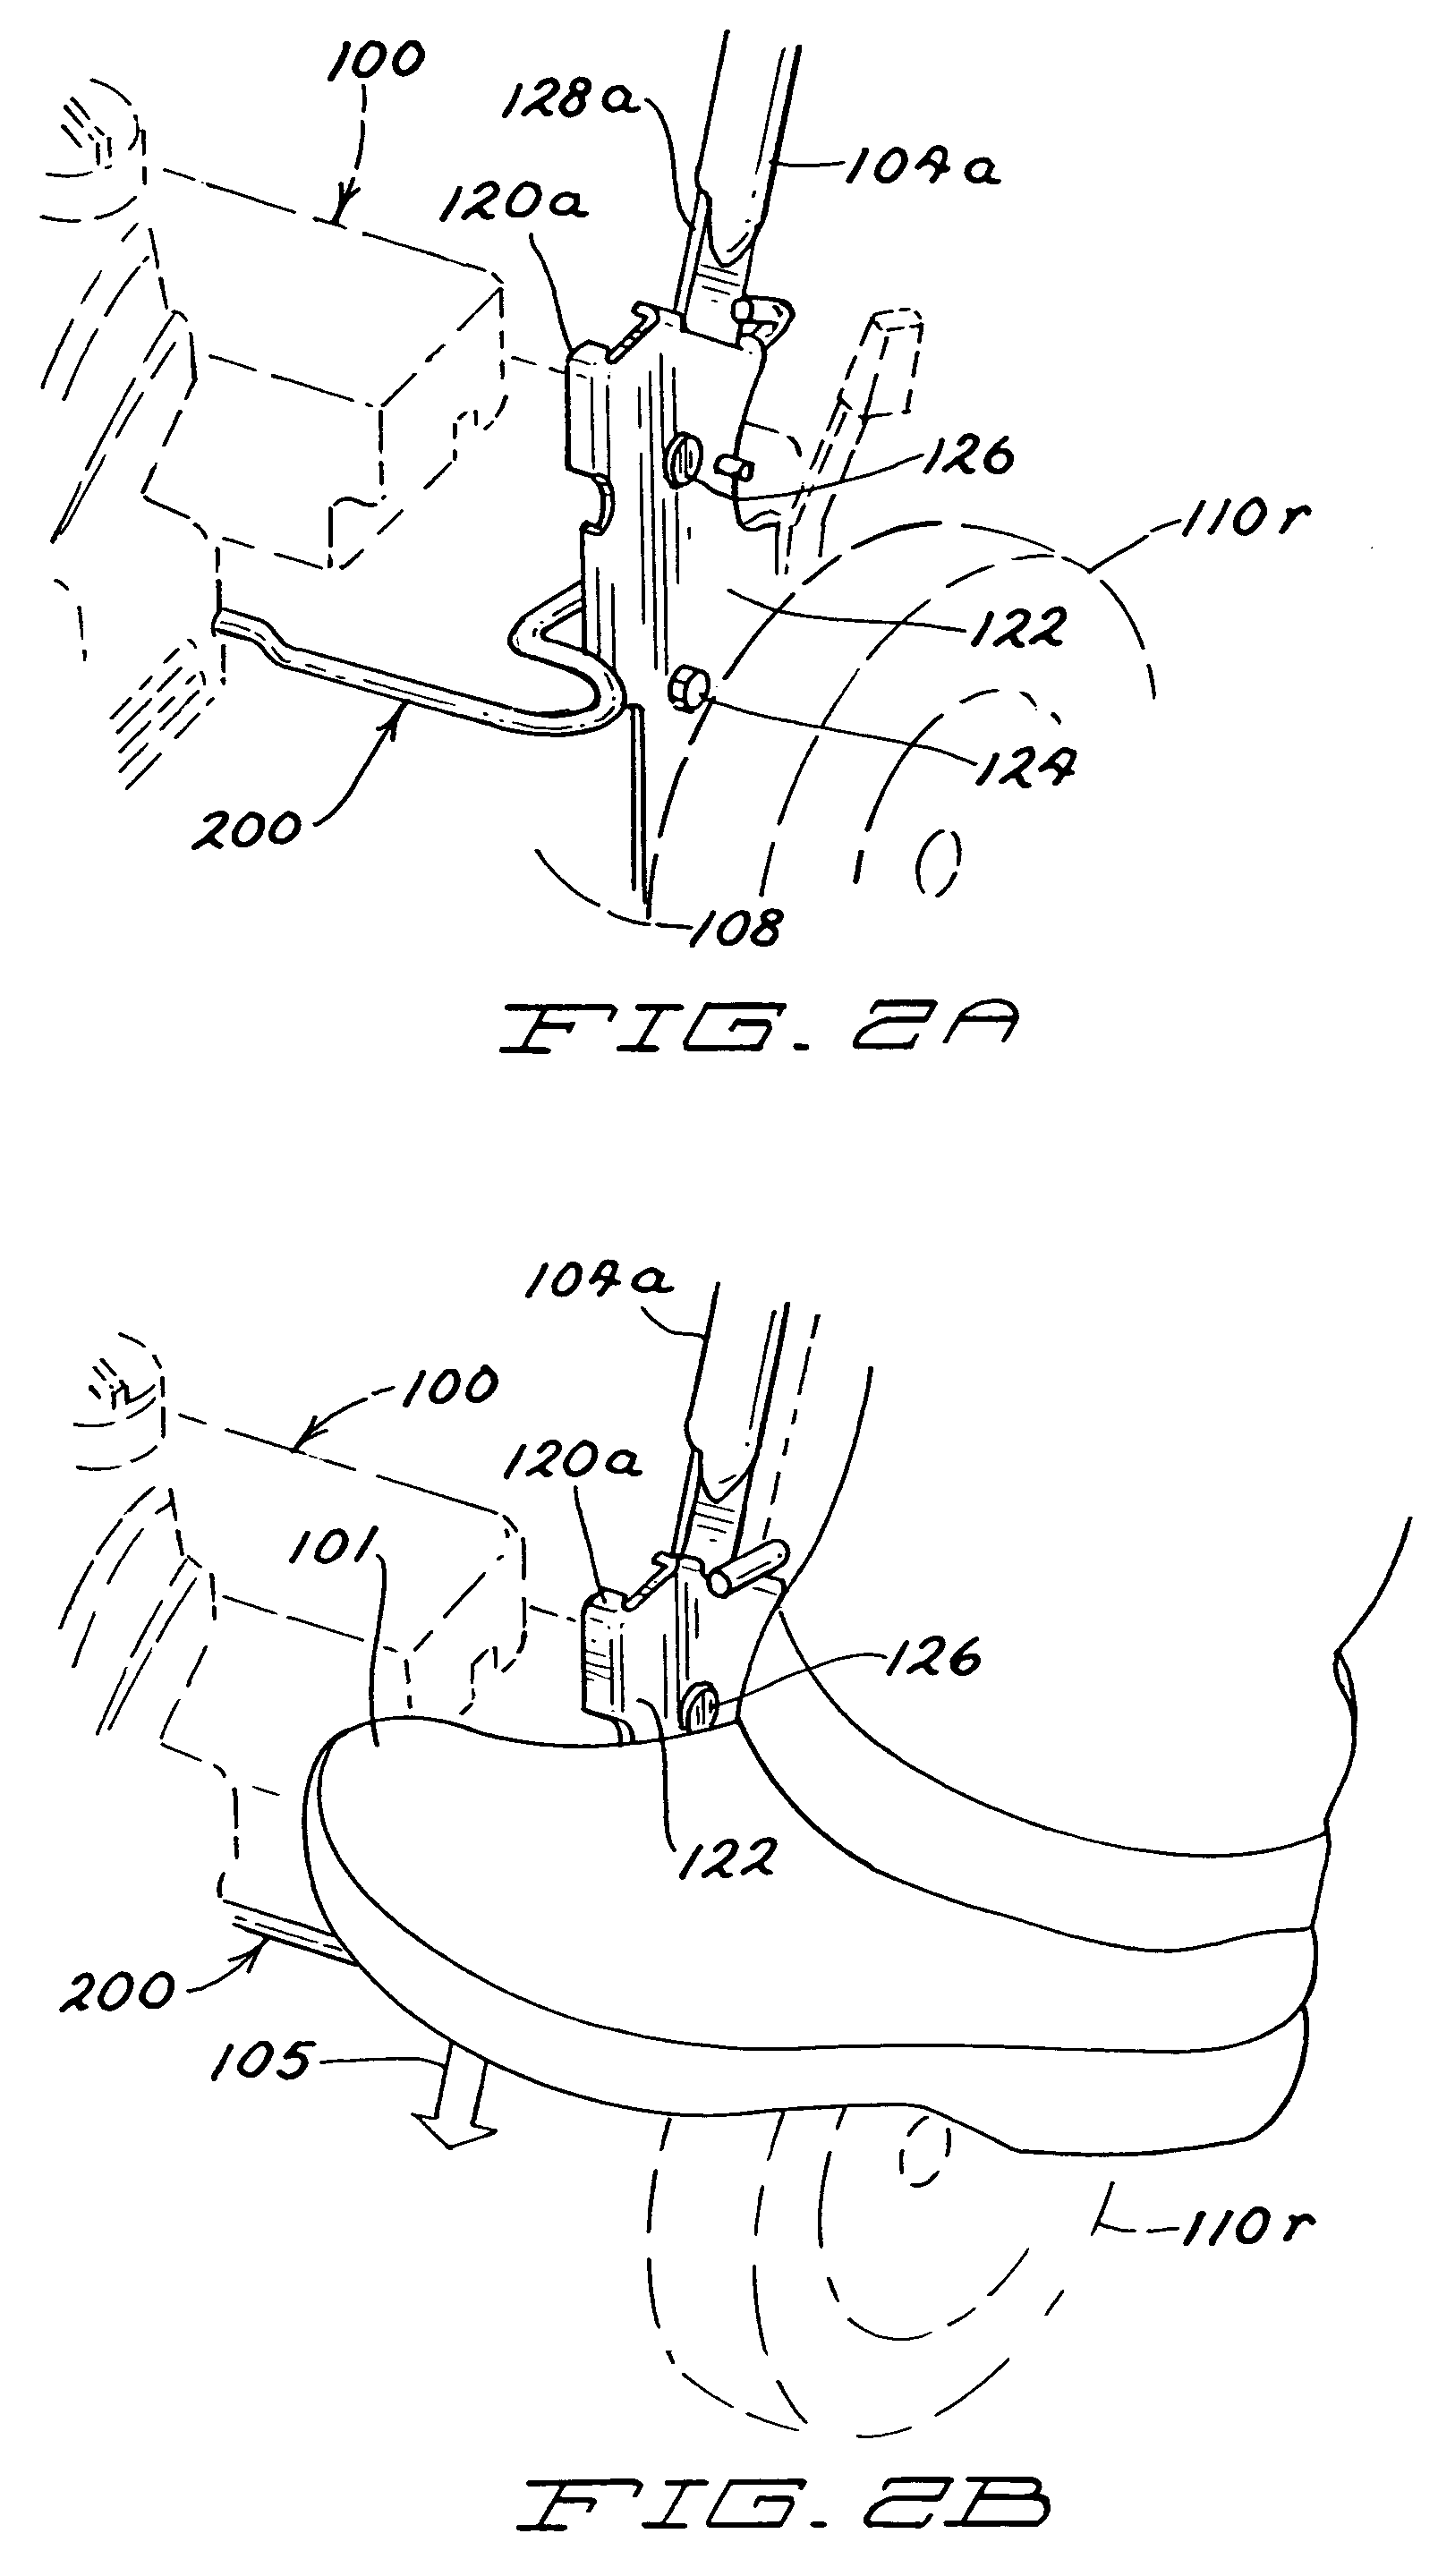 Walk-behind implement and handle assembly release apparatus for use with same